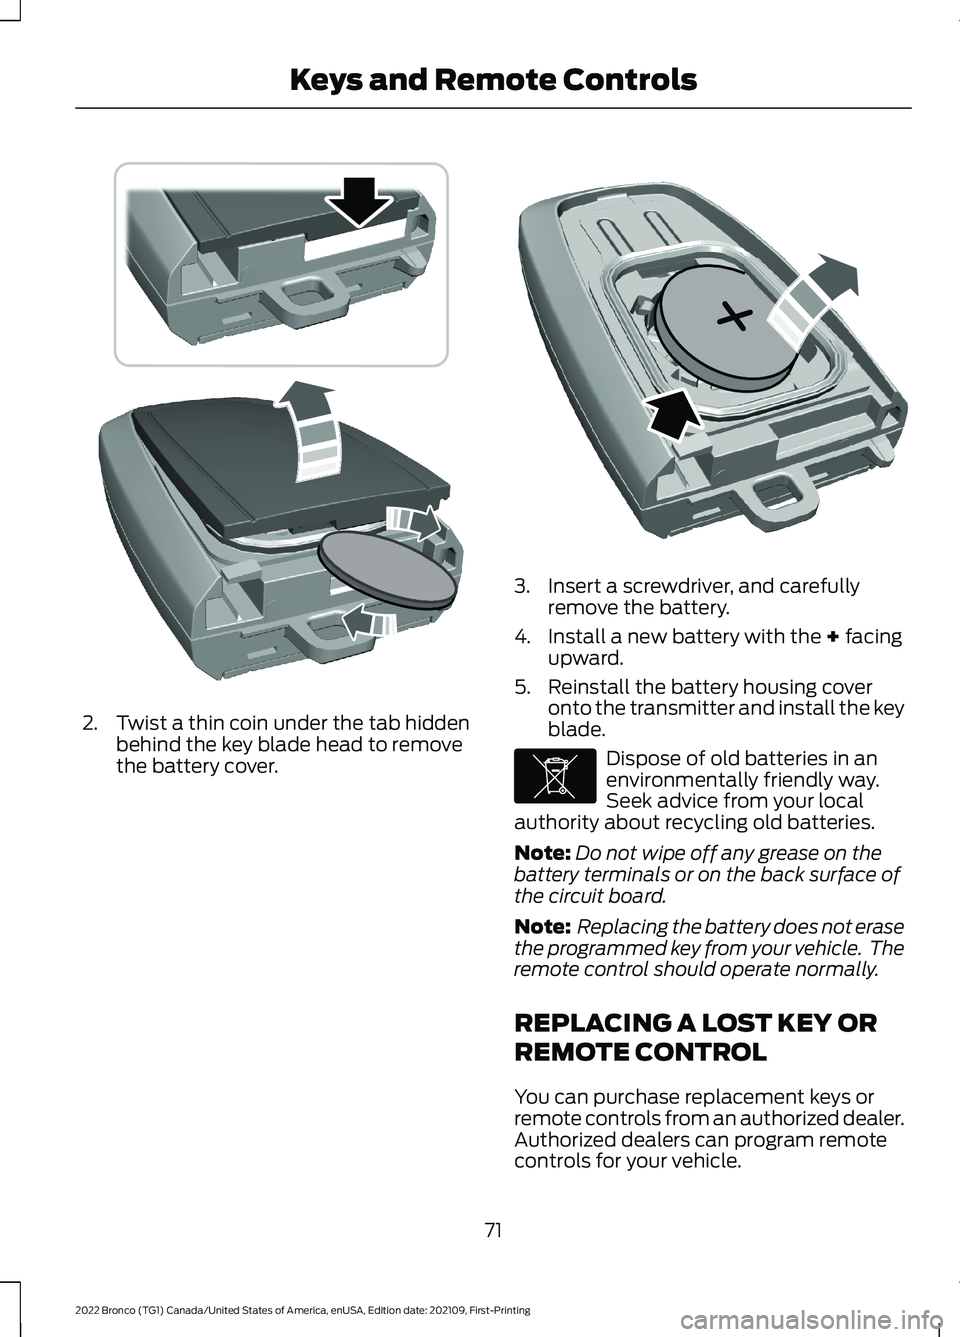 FORD BRONCO 2022  Owners Manual 2.Twist a thin coin under the tab hiddenbehind the key blade head to removethe battery cover.
3.Insert a screwdriver, and carefullyremove the battery.
4.Install a new battery with the + facingupward.
